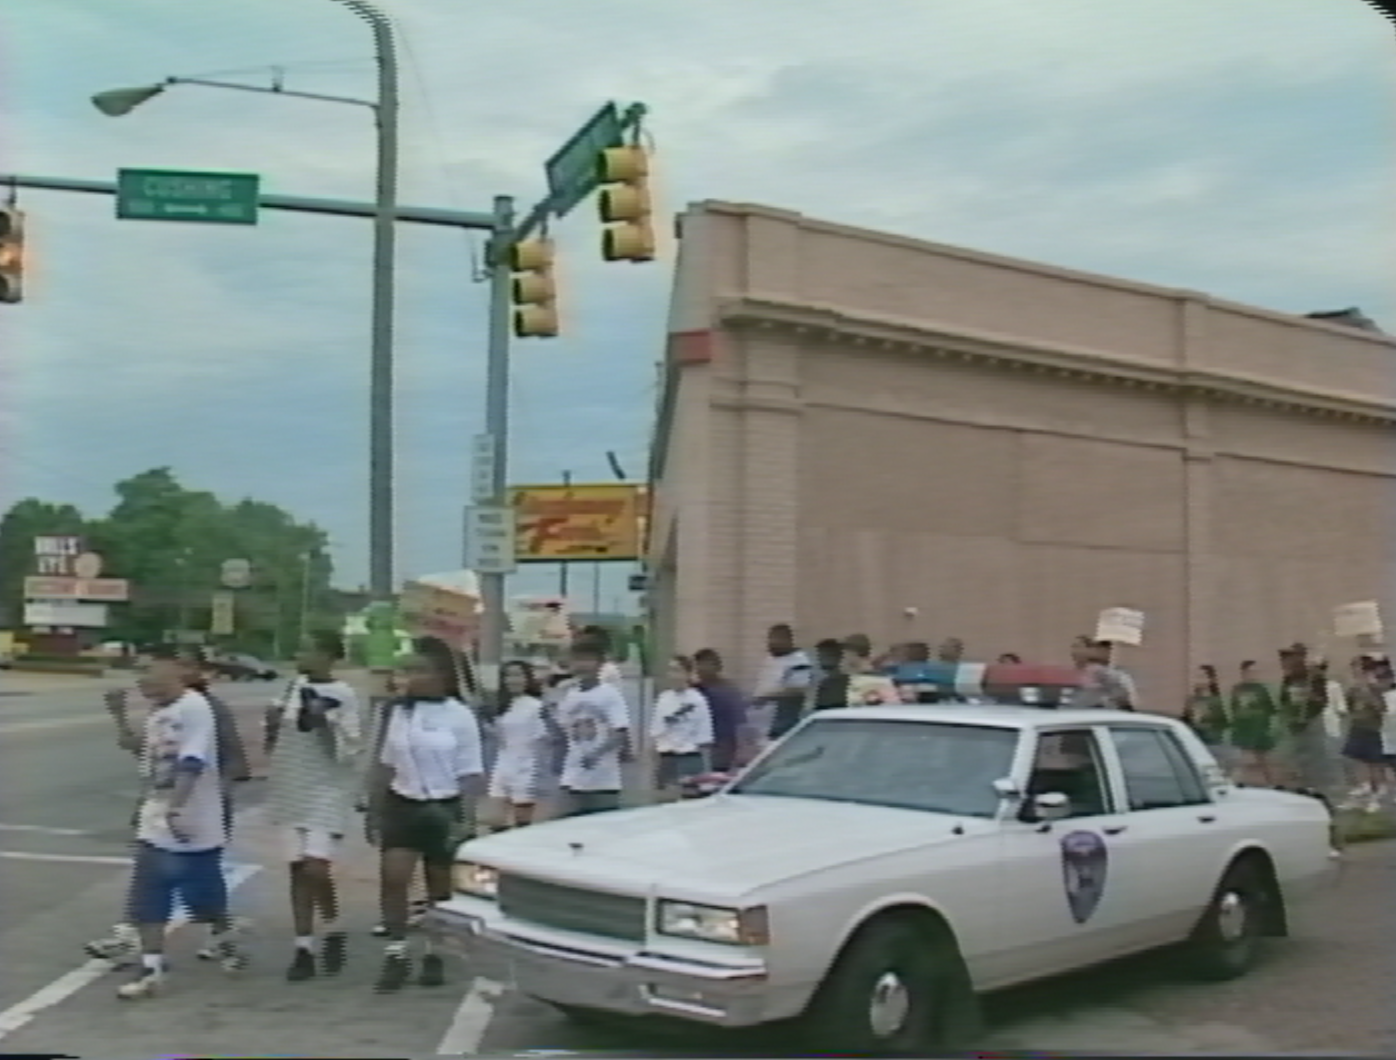 A screen grab of a WSJV segment on student demonstrations in South Bend, Indiana. July 26, 1995.